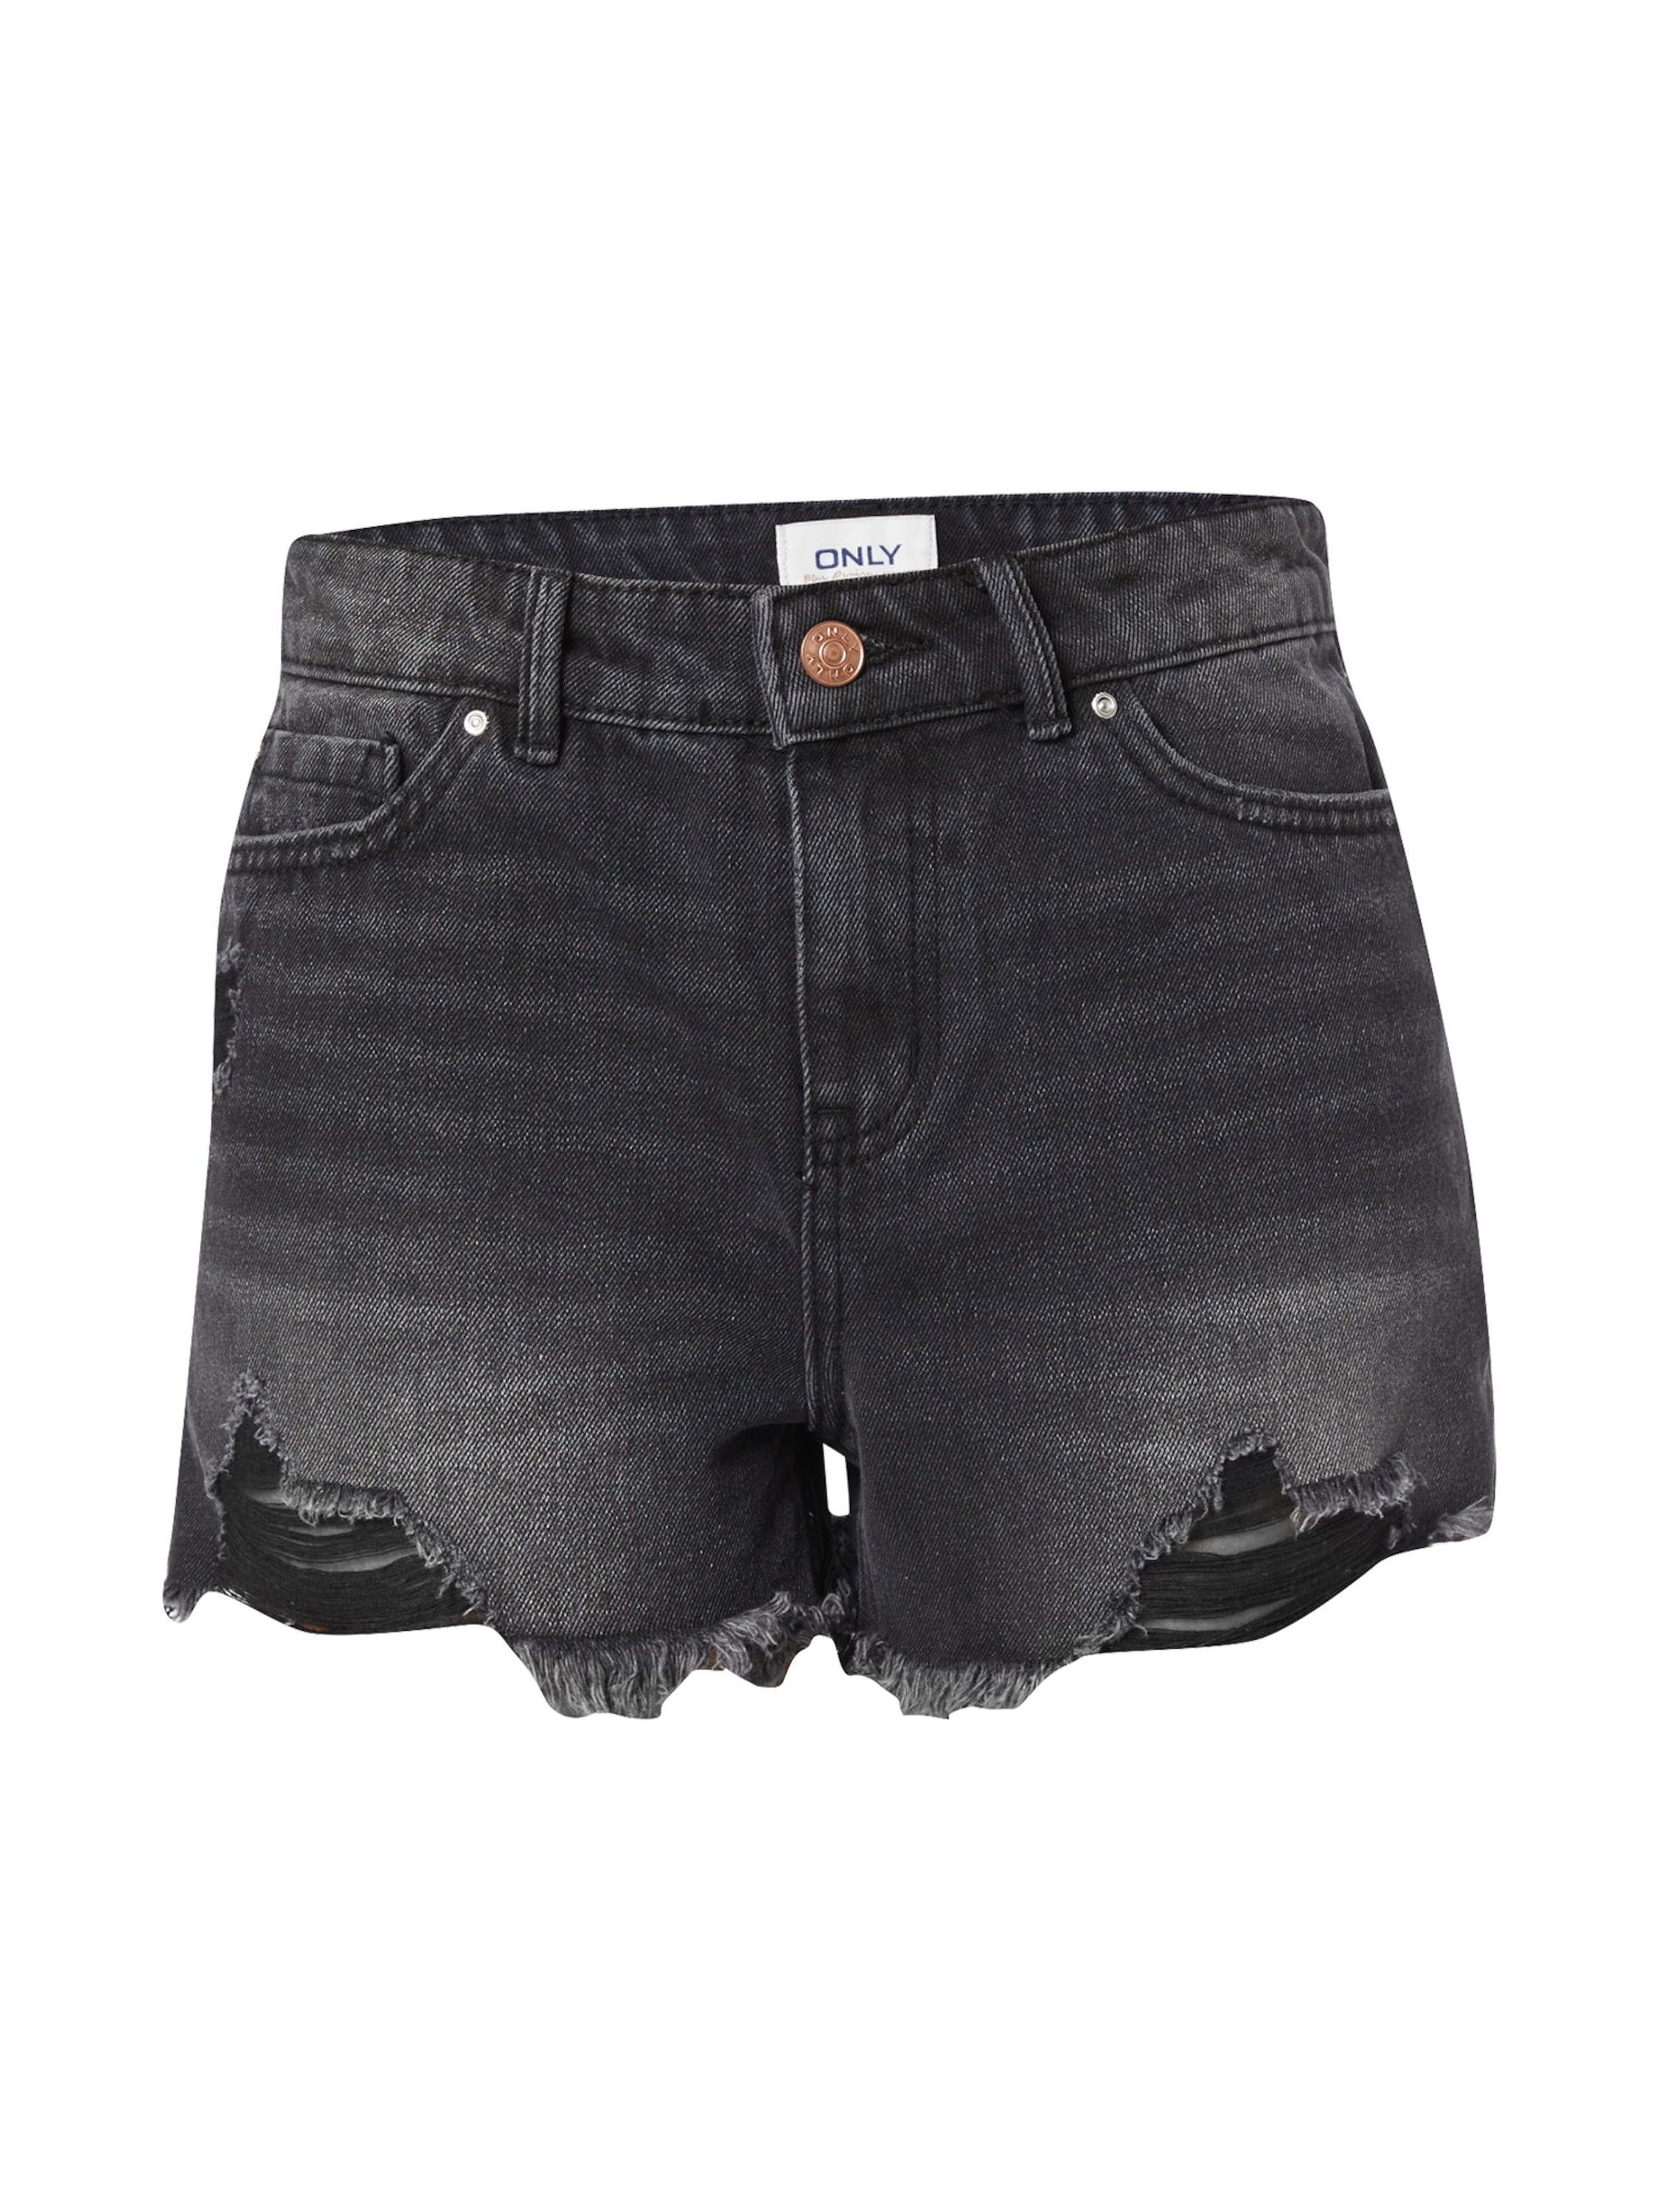 Weiteres ONLY Washed Fransen, Pacy Detail Black (1-tlg) Jeansshorts